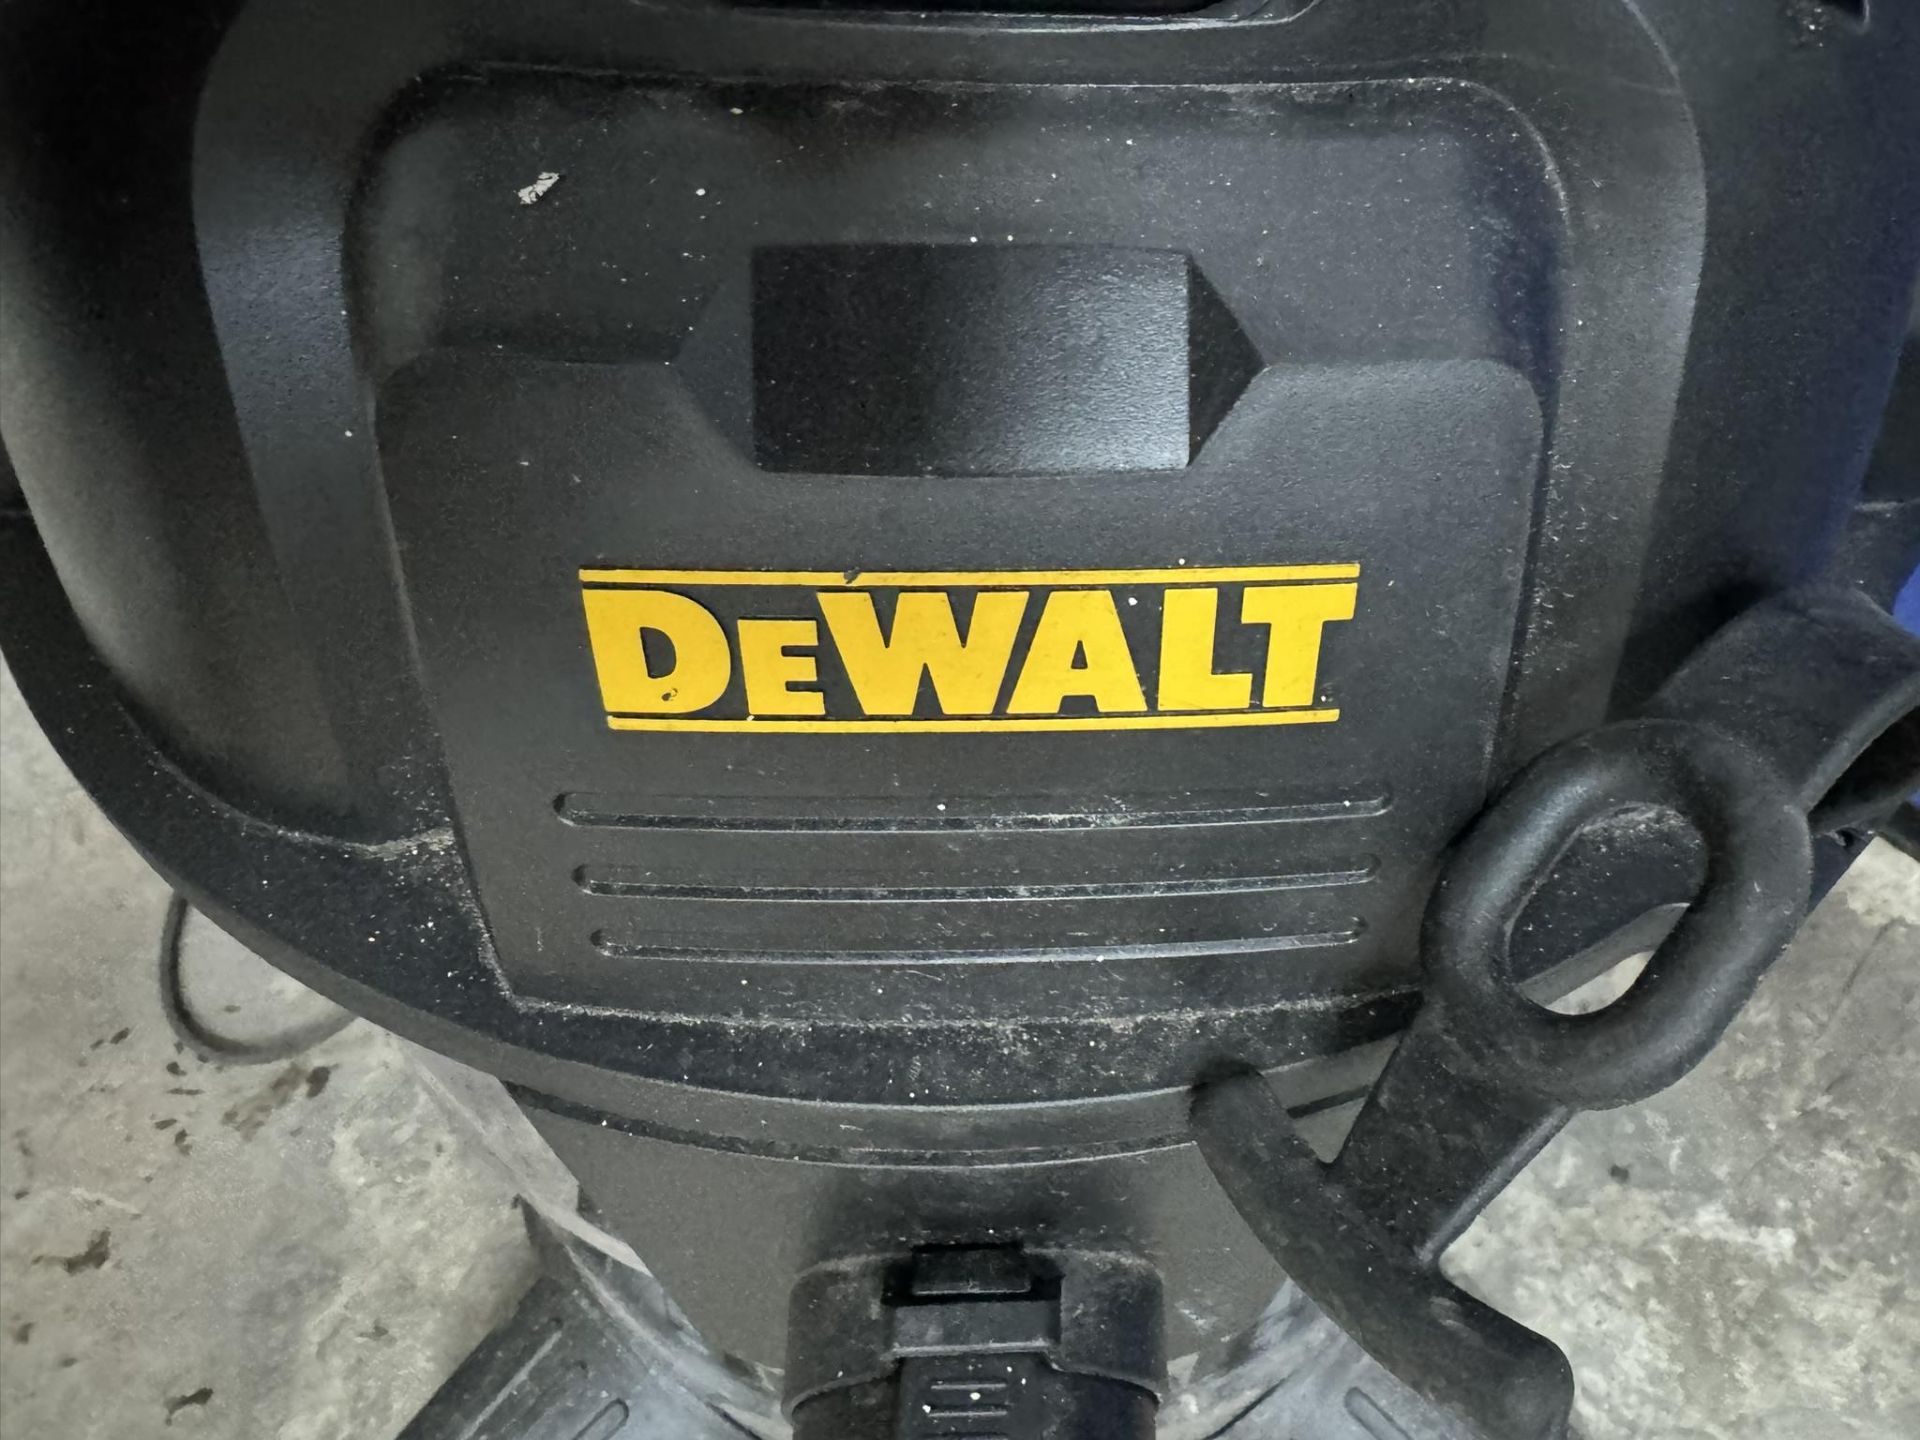 Dewalt DXV38S Wet And Dry Vacuum Cleaner - Image 4 of 5